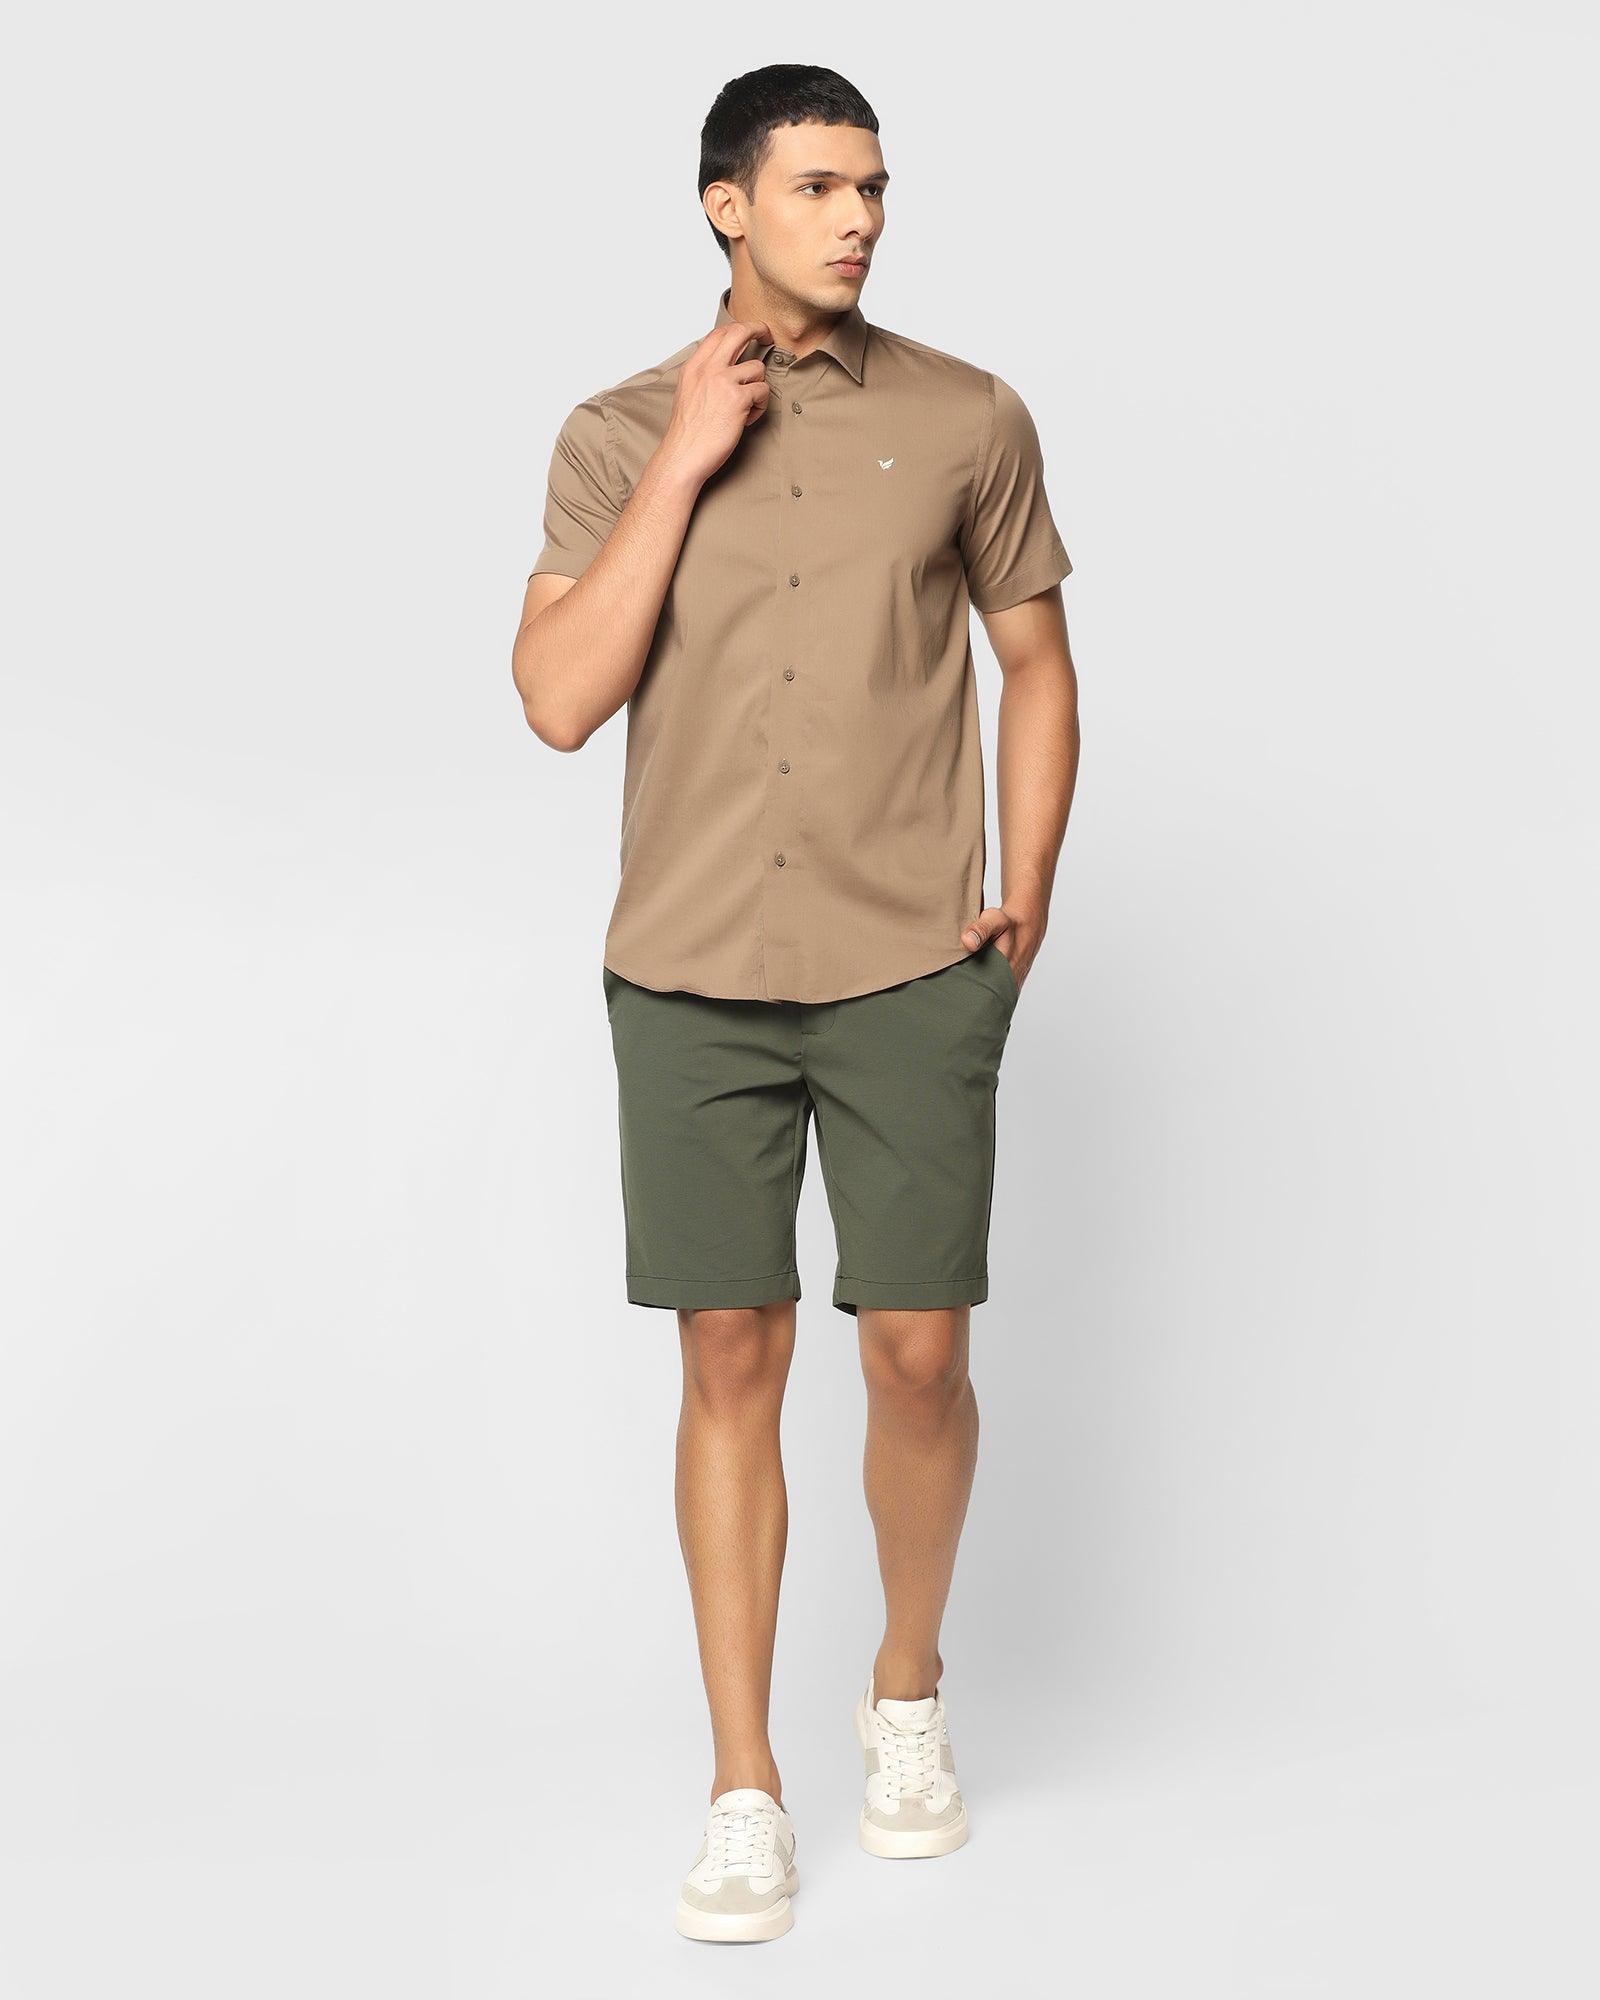 TechPro Casual Dark Olive Solid Shorts - Serry